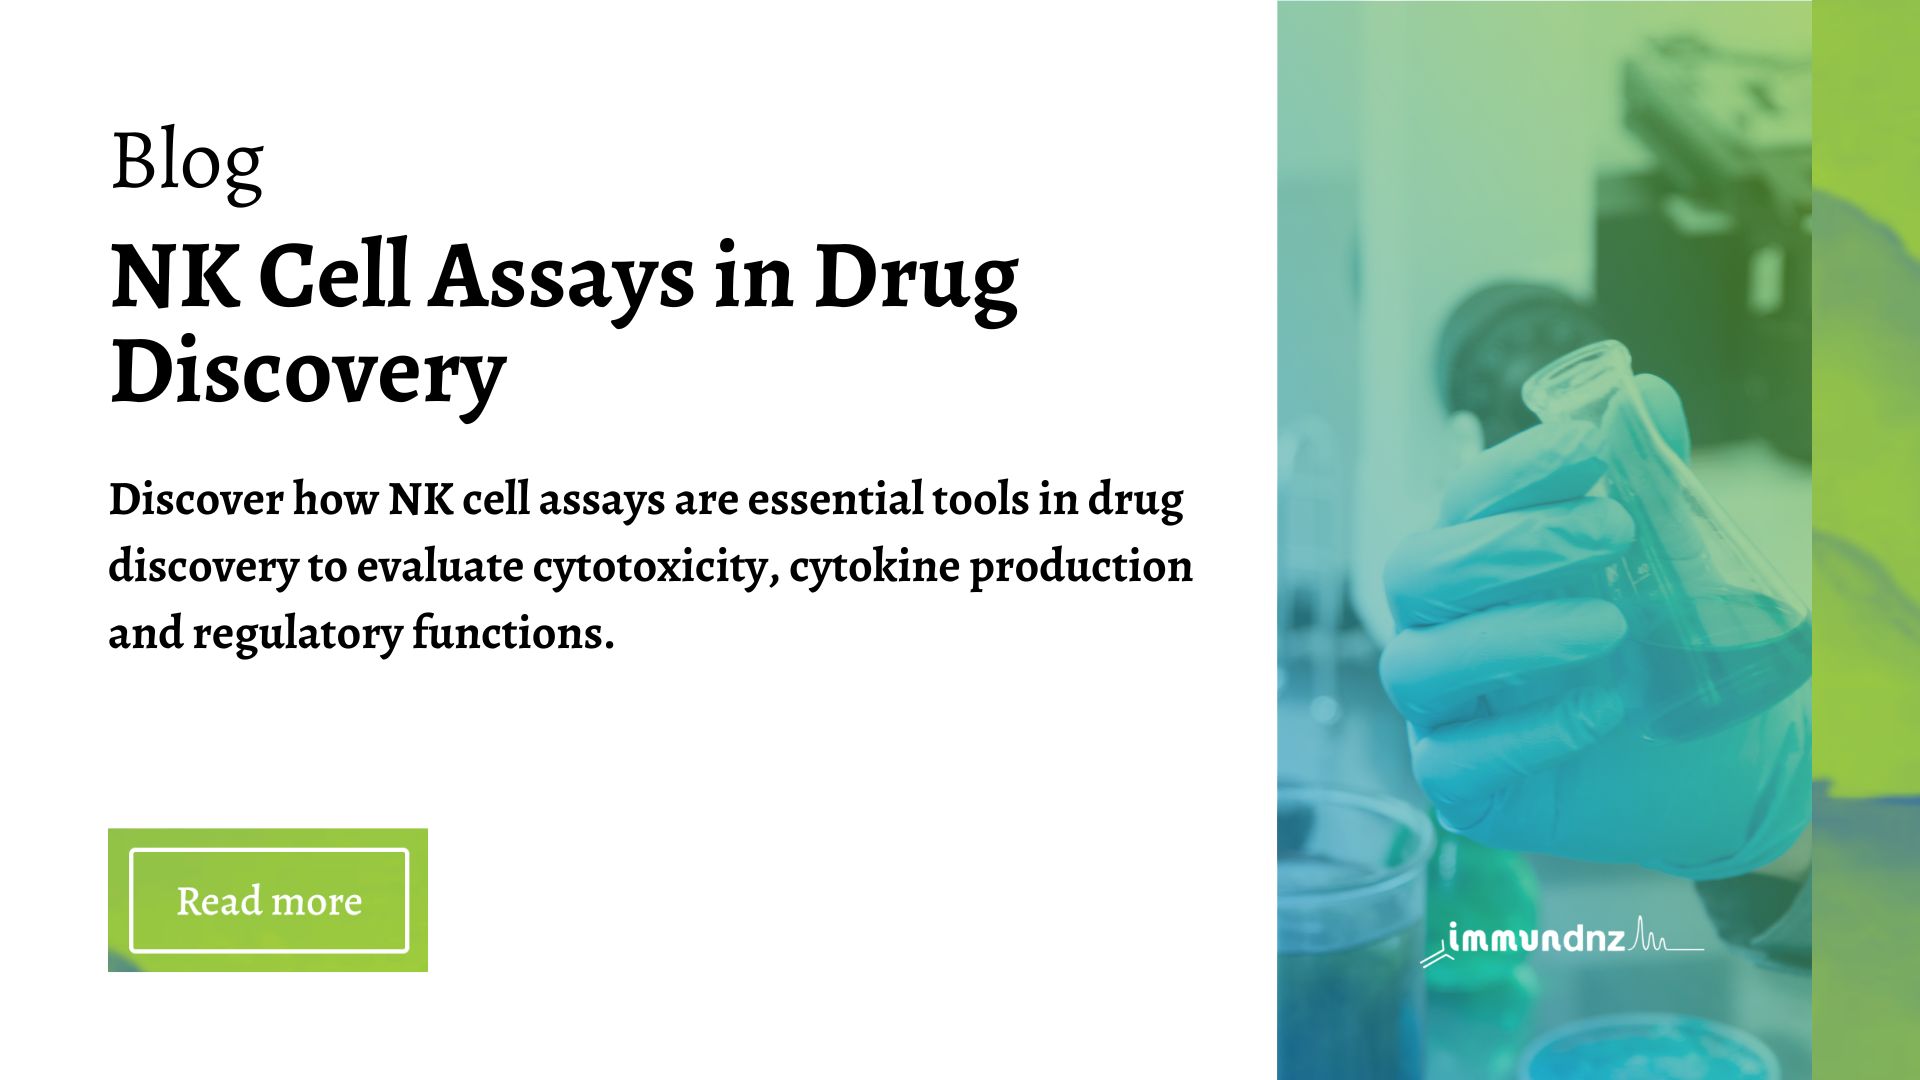 NK cell assays in drug discovery